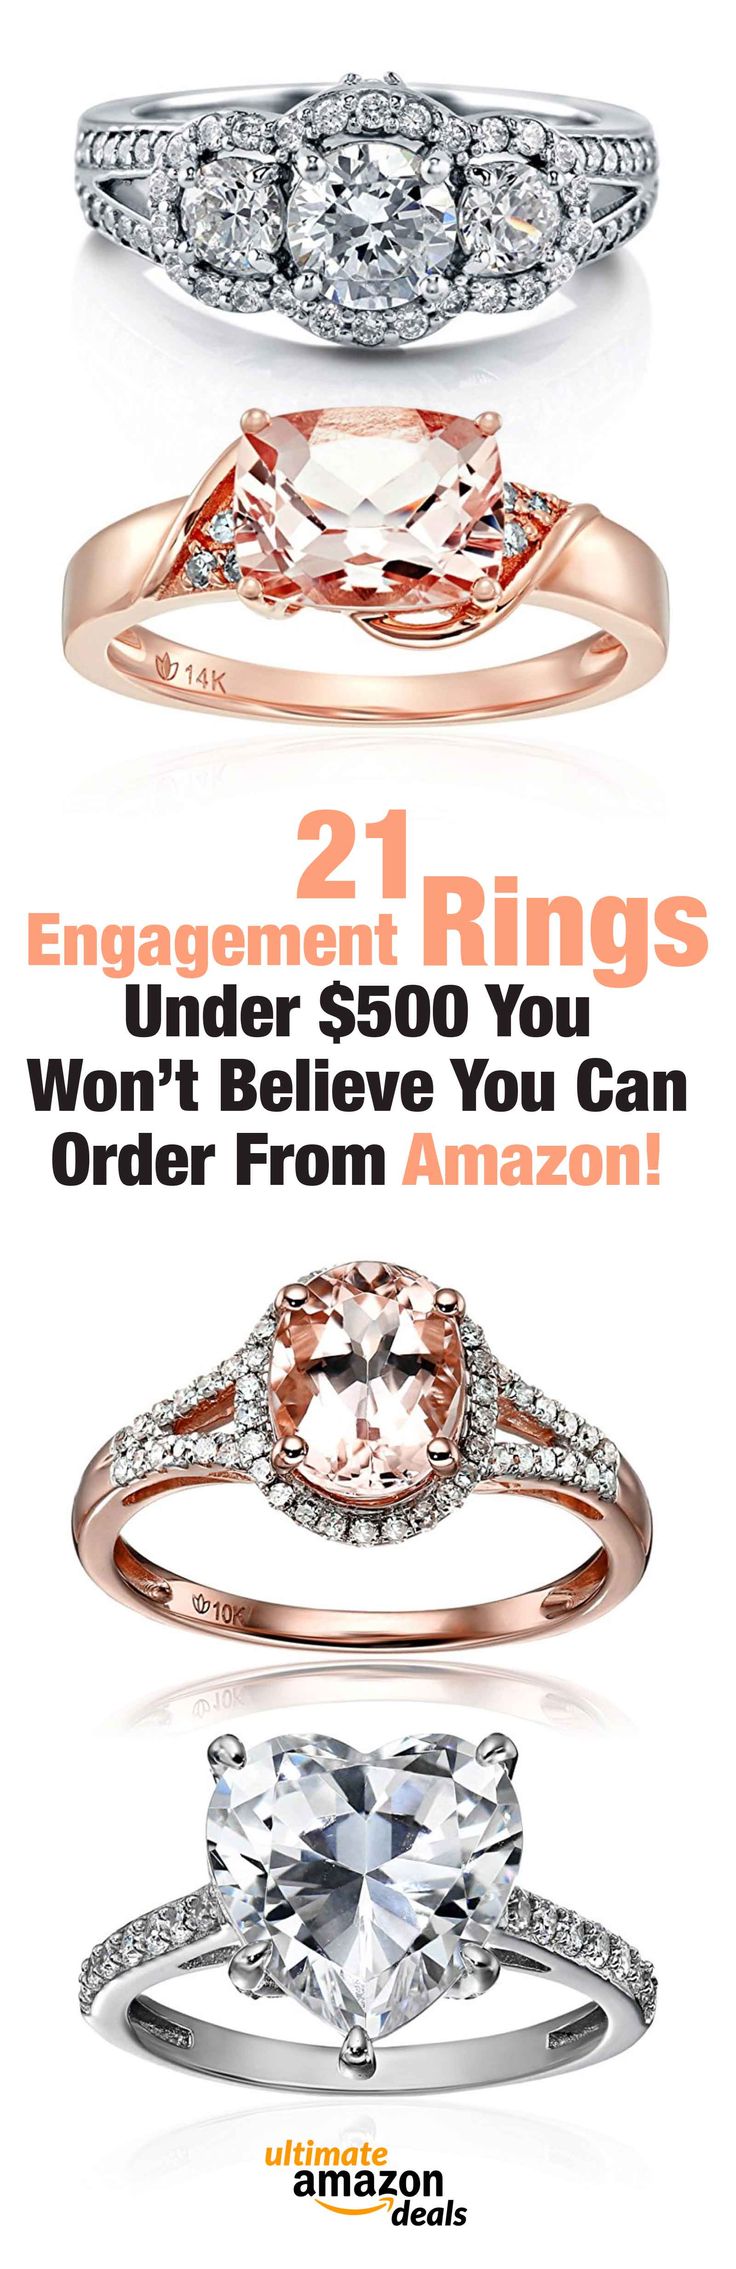 21 Engagement Rings Under $500 You Won’t Believe You Can Order From Amazon!